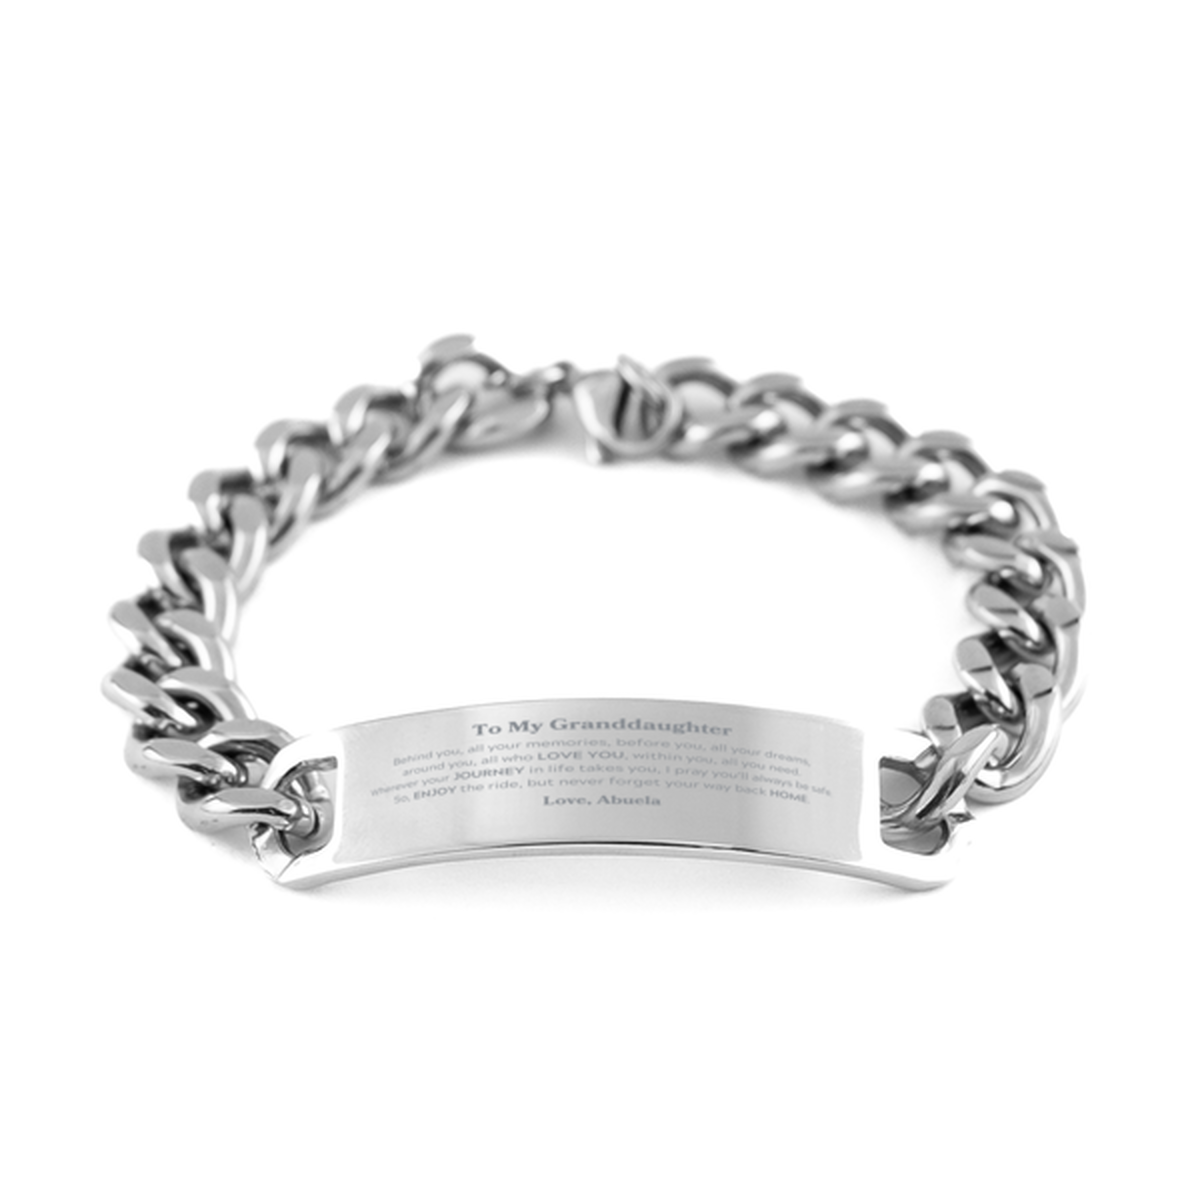 To My Granddaughter Graduation Gifts from Abuela, Granddaughter Cuban Chain Stainless Steel Bracelet Christmas Birthday Gifts for Granddaughter Behind you, all your memories, before you, all your dreams. Love, Abuela